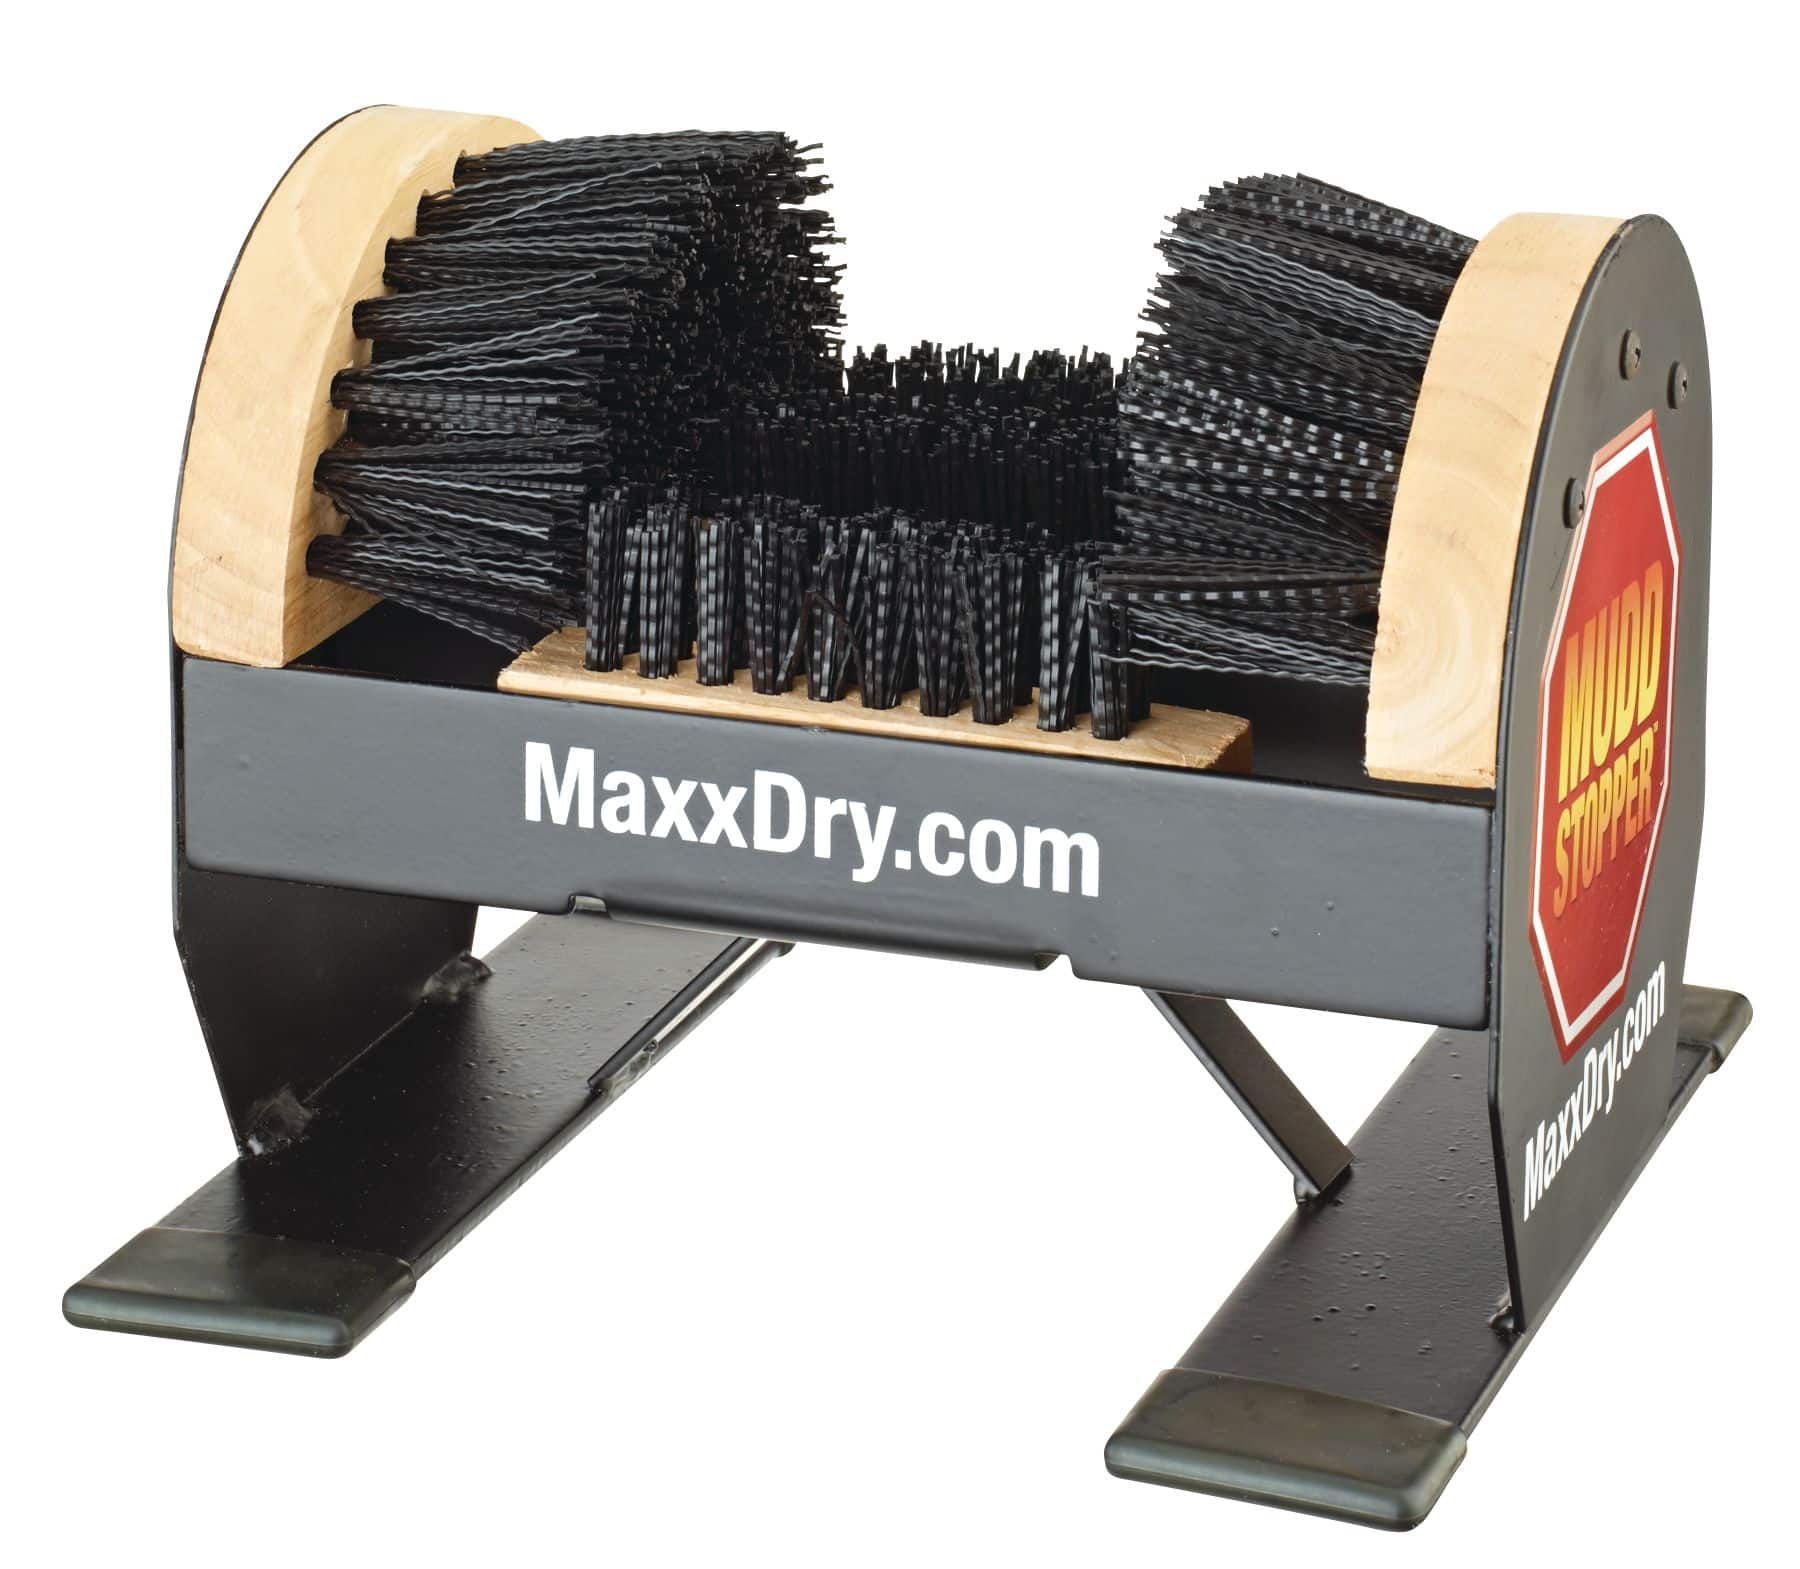 Stiff bristle brush - best boot cleaning brush and leather boot cleaner